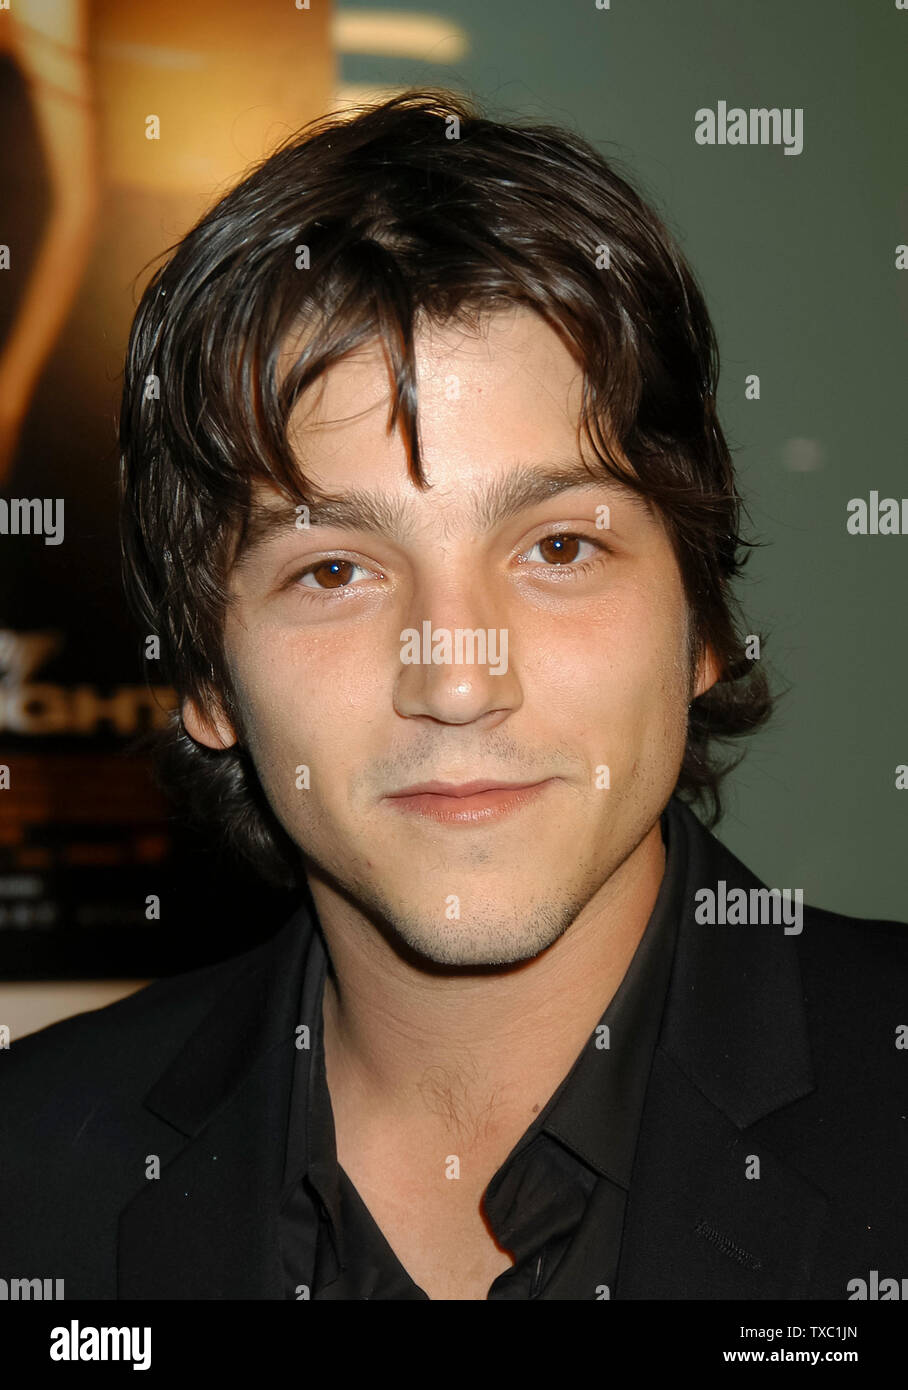 Diego Luna at the 'Dirty Dancing: Havana Nights' World Premiere at The Arclight Cinerama Dome in Hollywood, The event took place on Tuesday, February 24, 2004. Photo by: SBM / PictureLux -